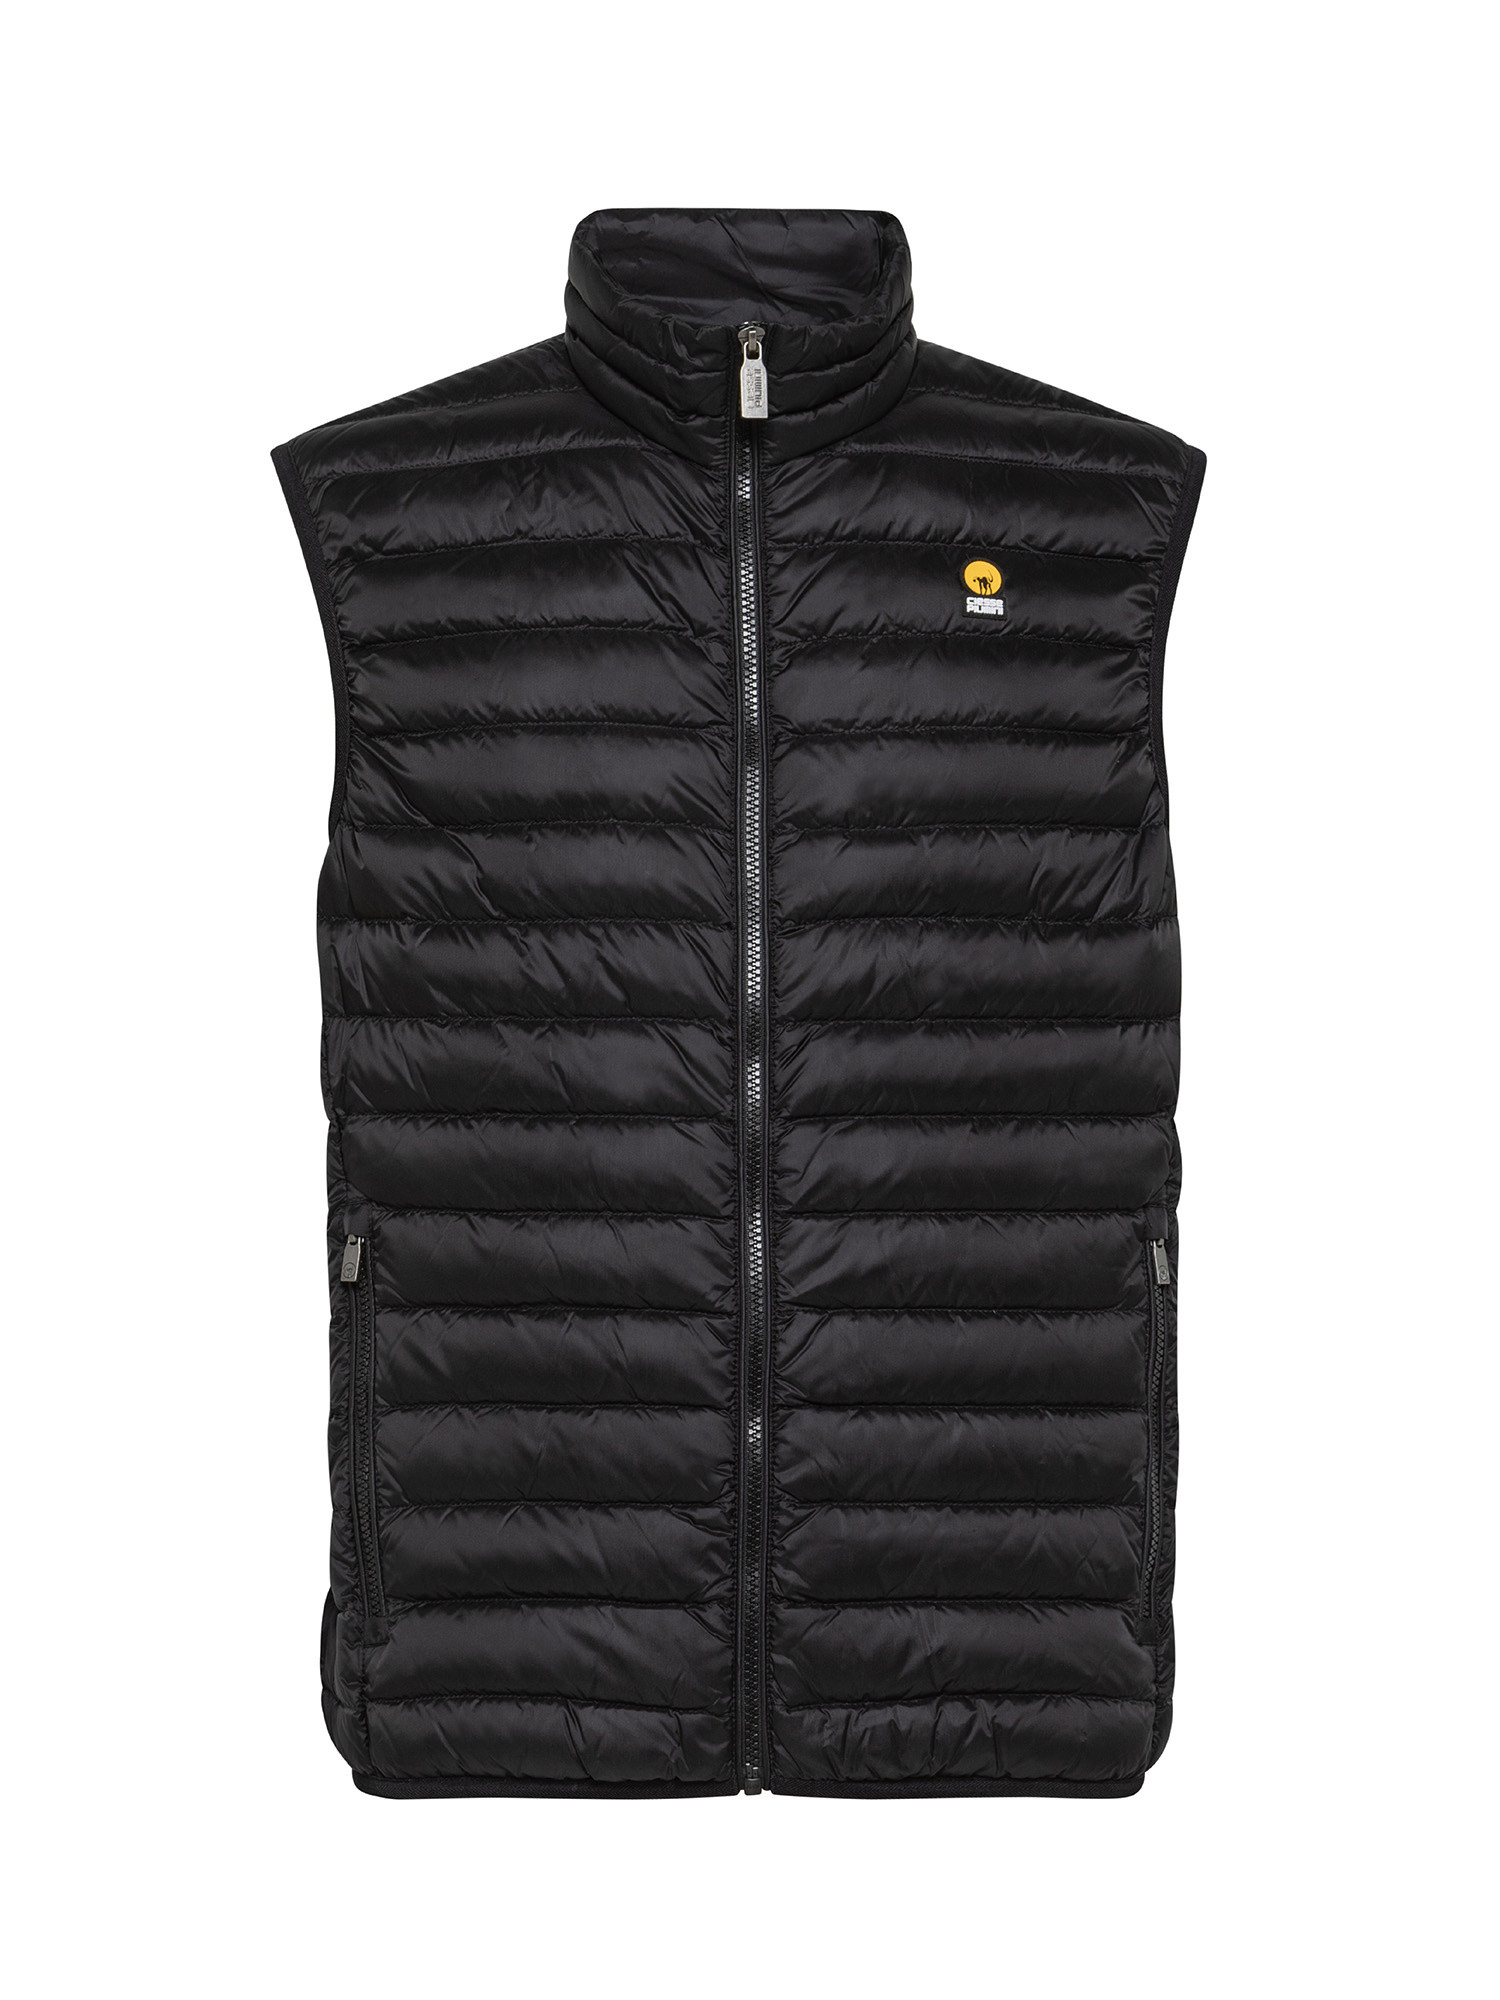 Ciesse Piumini - Full zip quilted gilet in nylon, Black, large image number 0